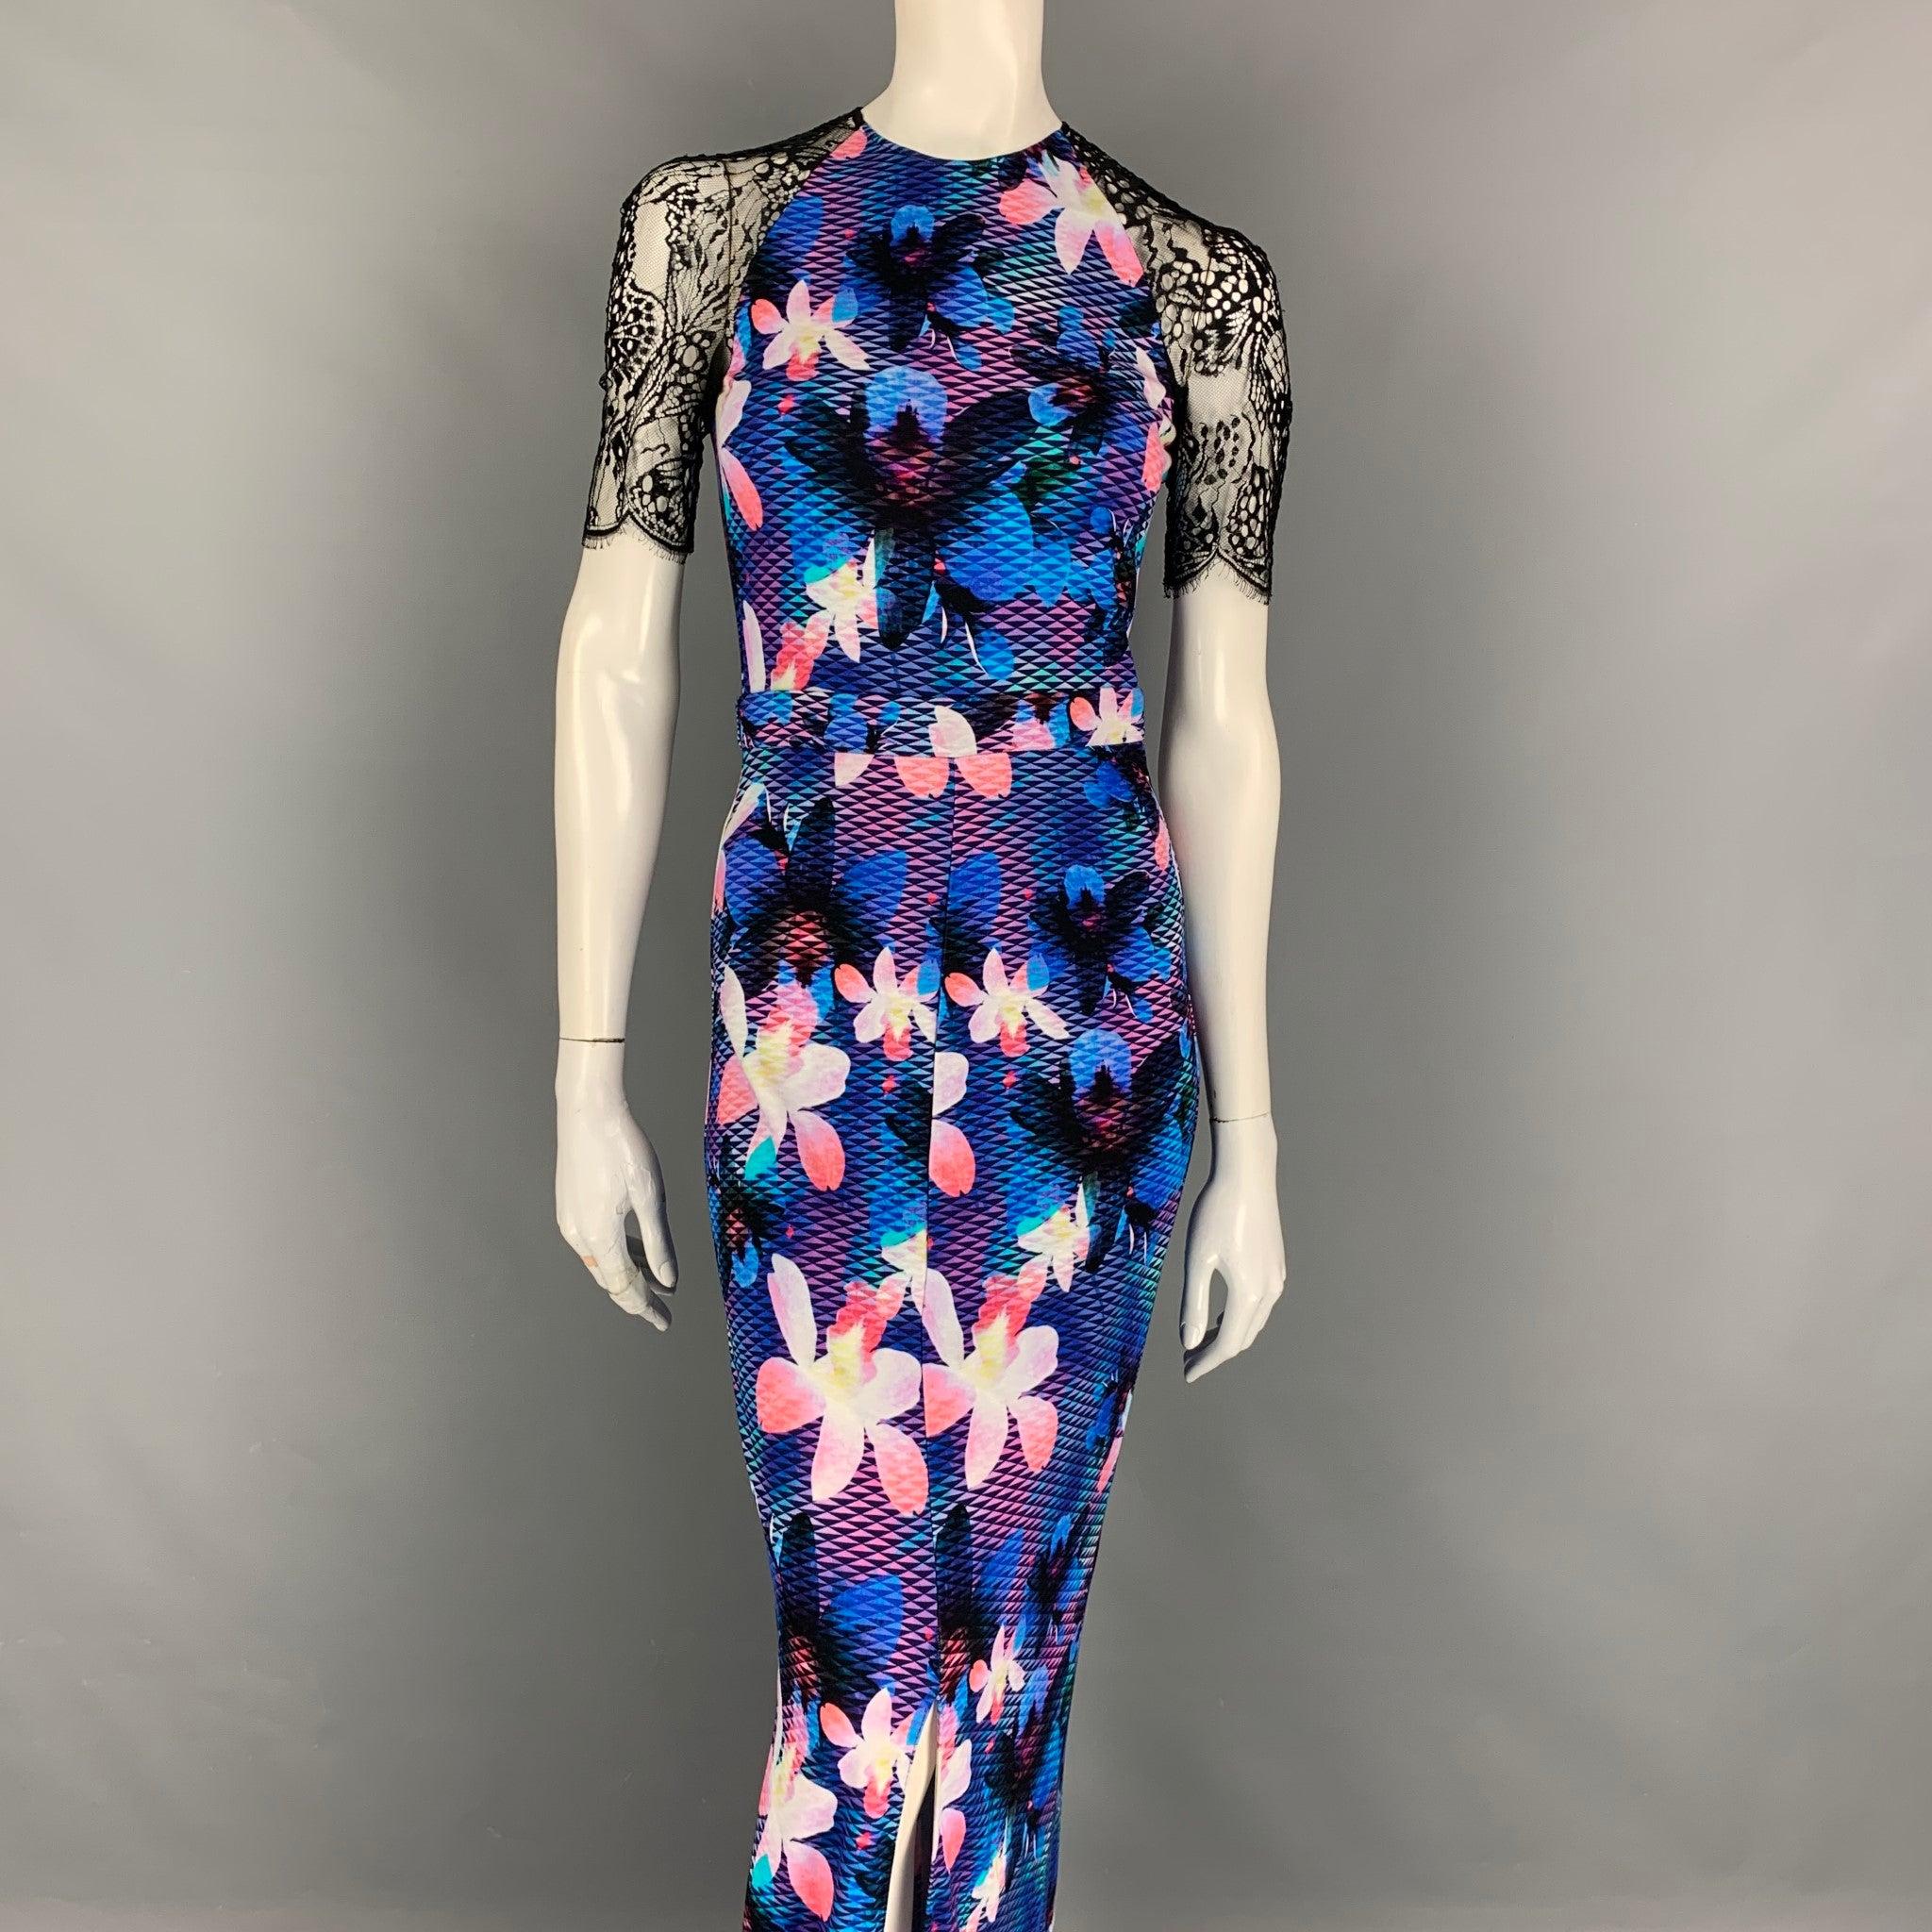 MATTHEW WILLIAMSON dress comes in a multi-color viscose featuring a black lace panel, front slit, and a back zip up closure. Made in Italy.
Very Good
Pre-Owned Condition. 

Marked:   8 

Measurements: 
 
Shoulder: 15 inches  Bust: 30 inches  Waist: